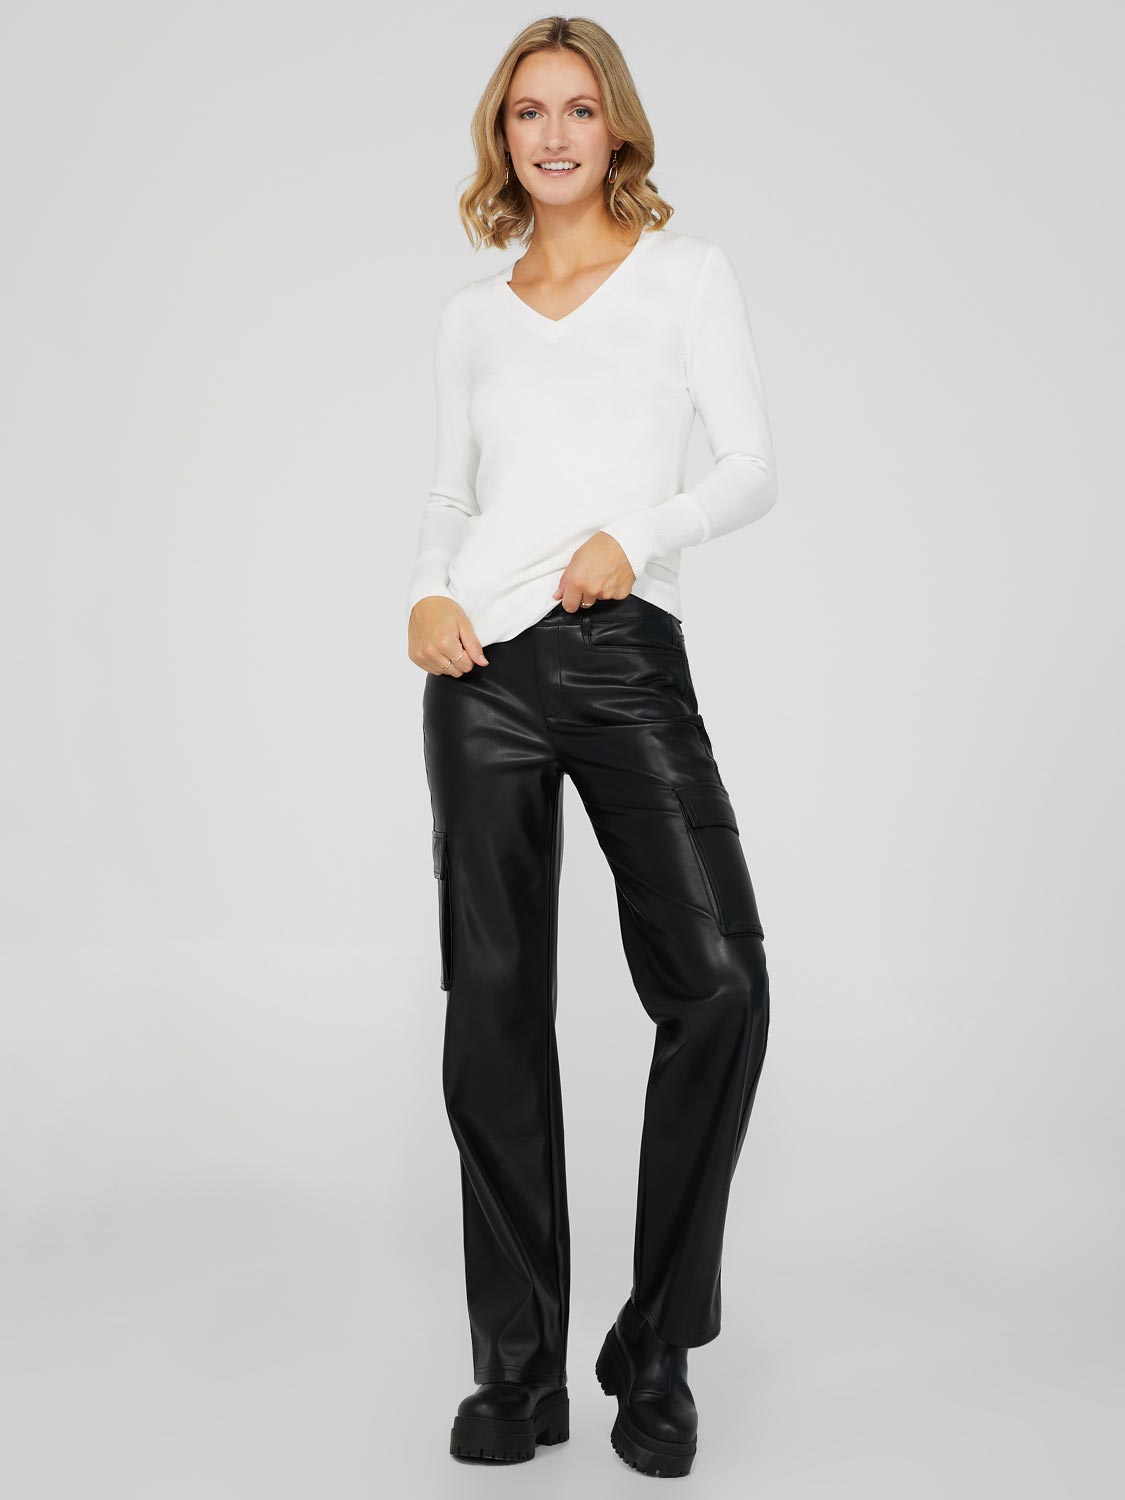 Olesia  Leather Pants - SHARO'S COLLECTION